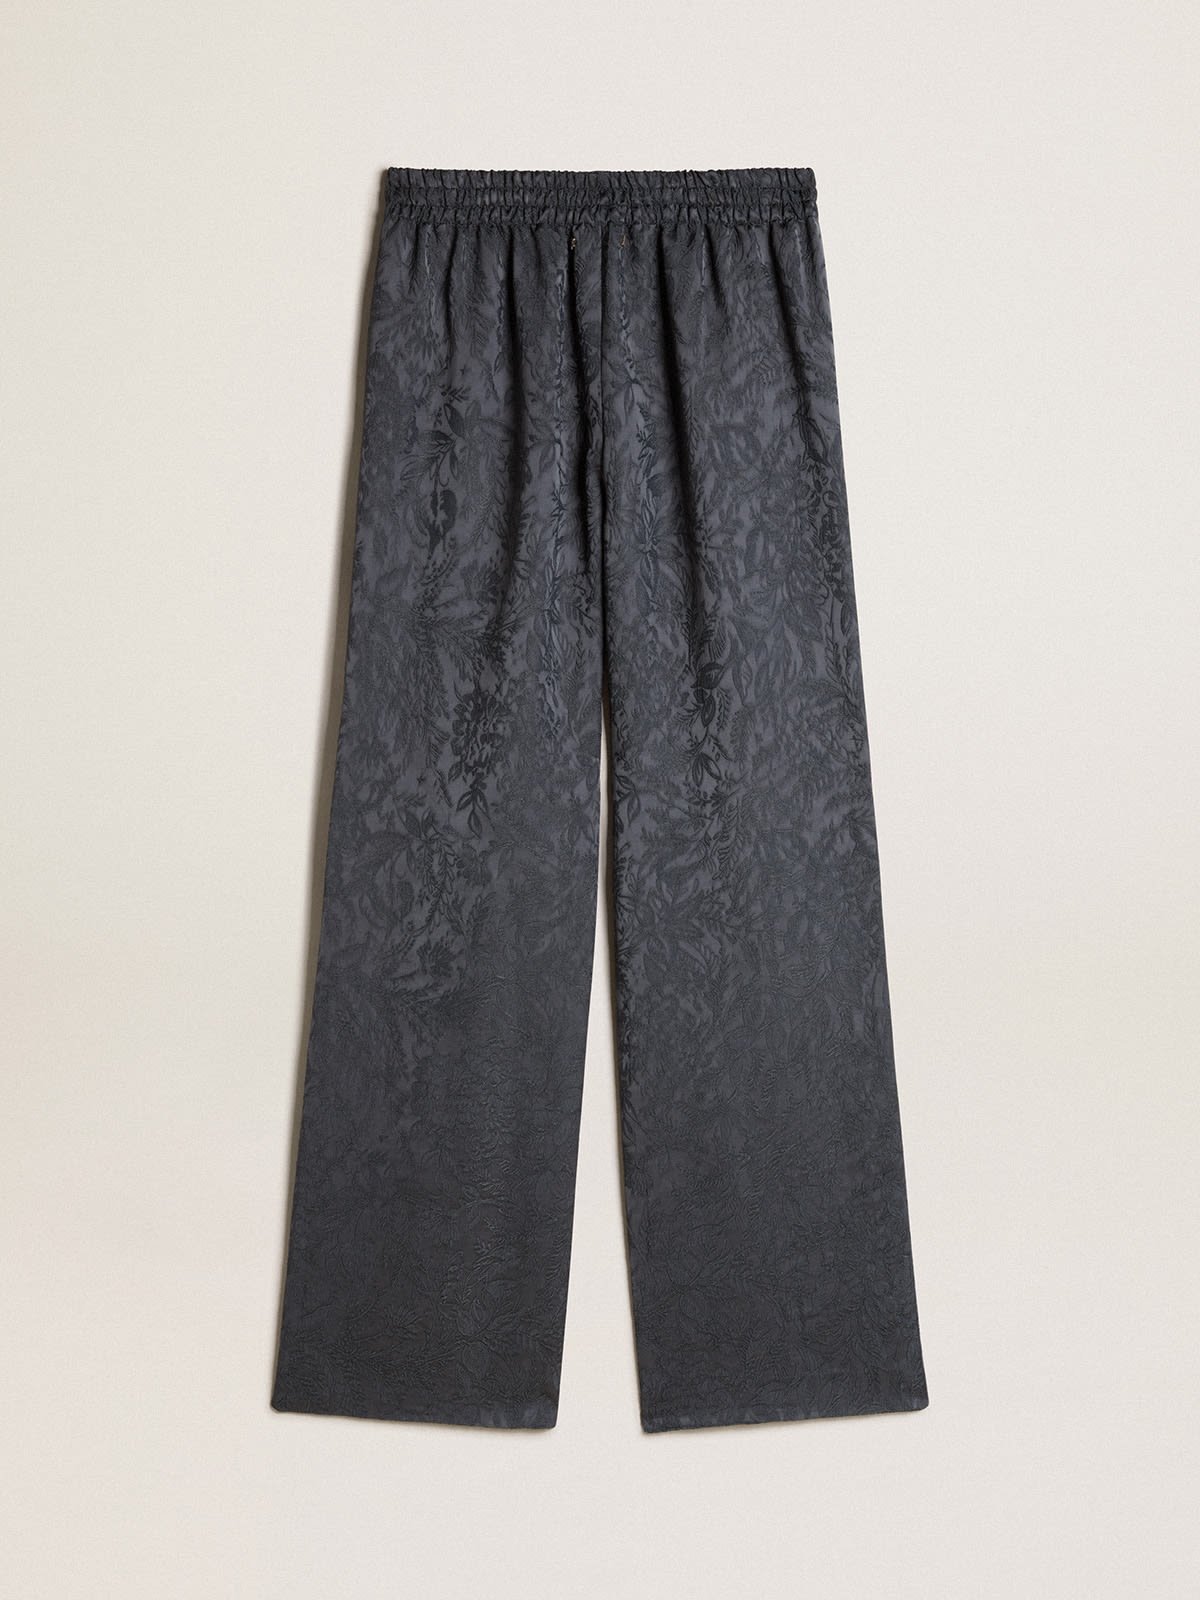 Jacquard pants with all-over toile de jouy pattern - 5